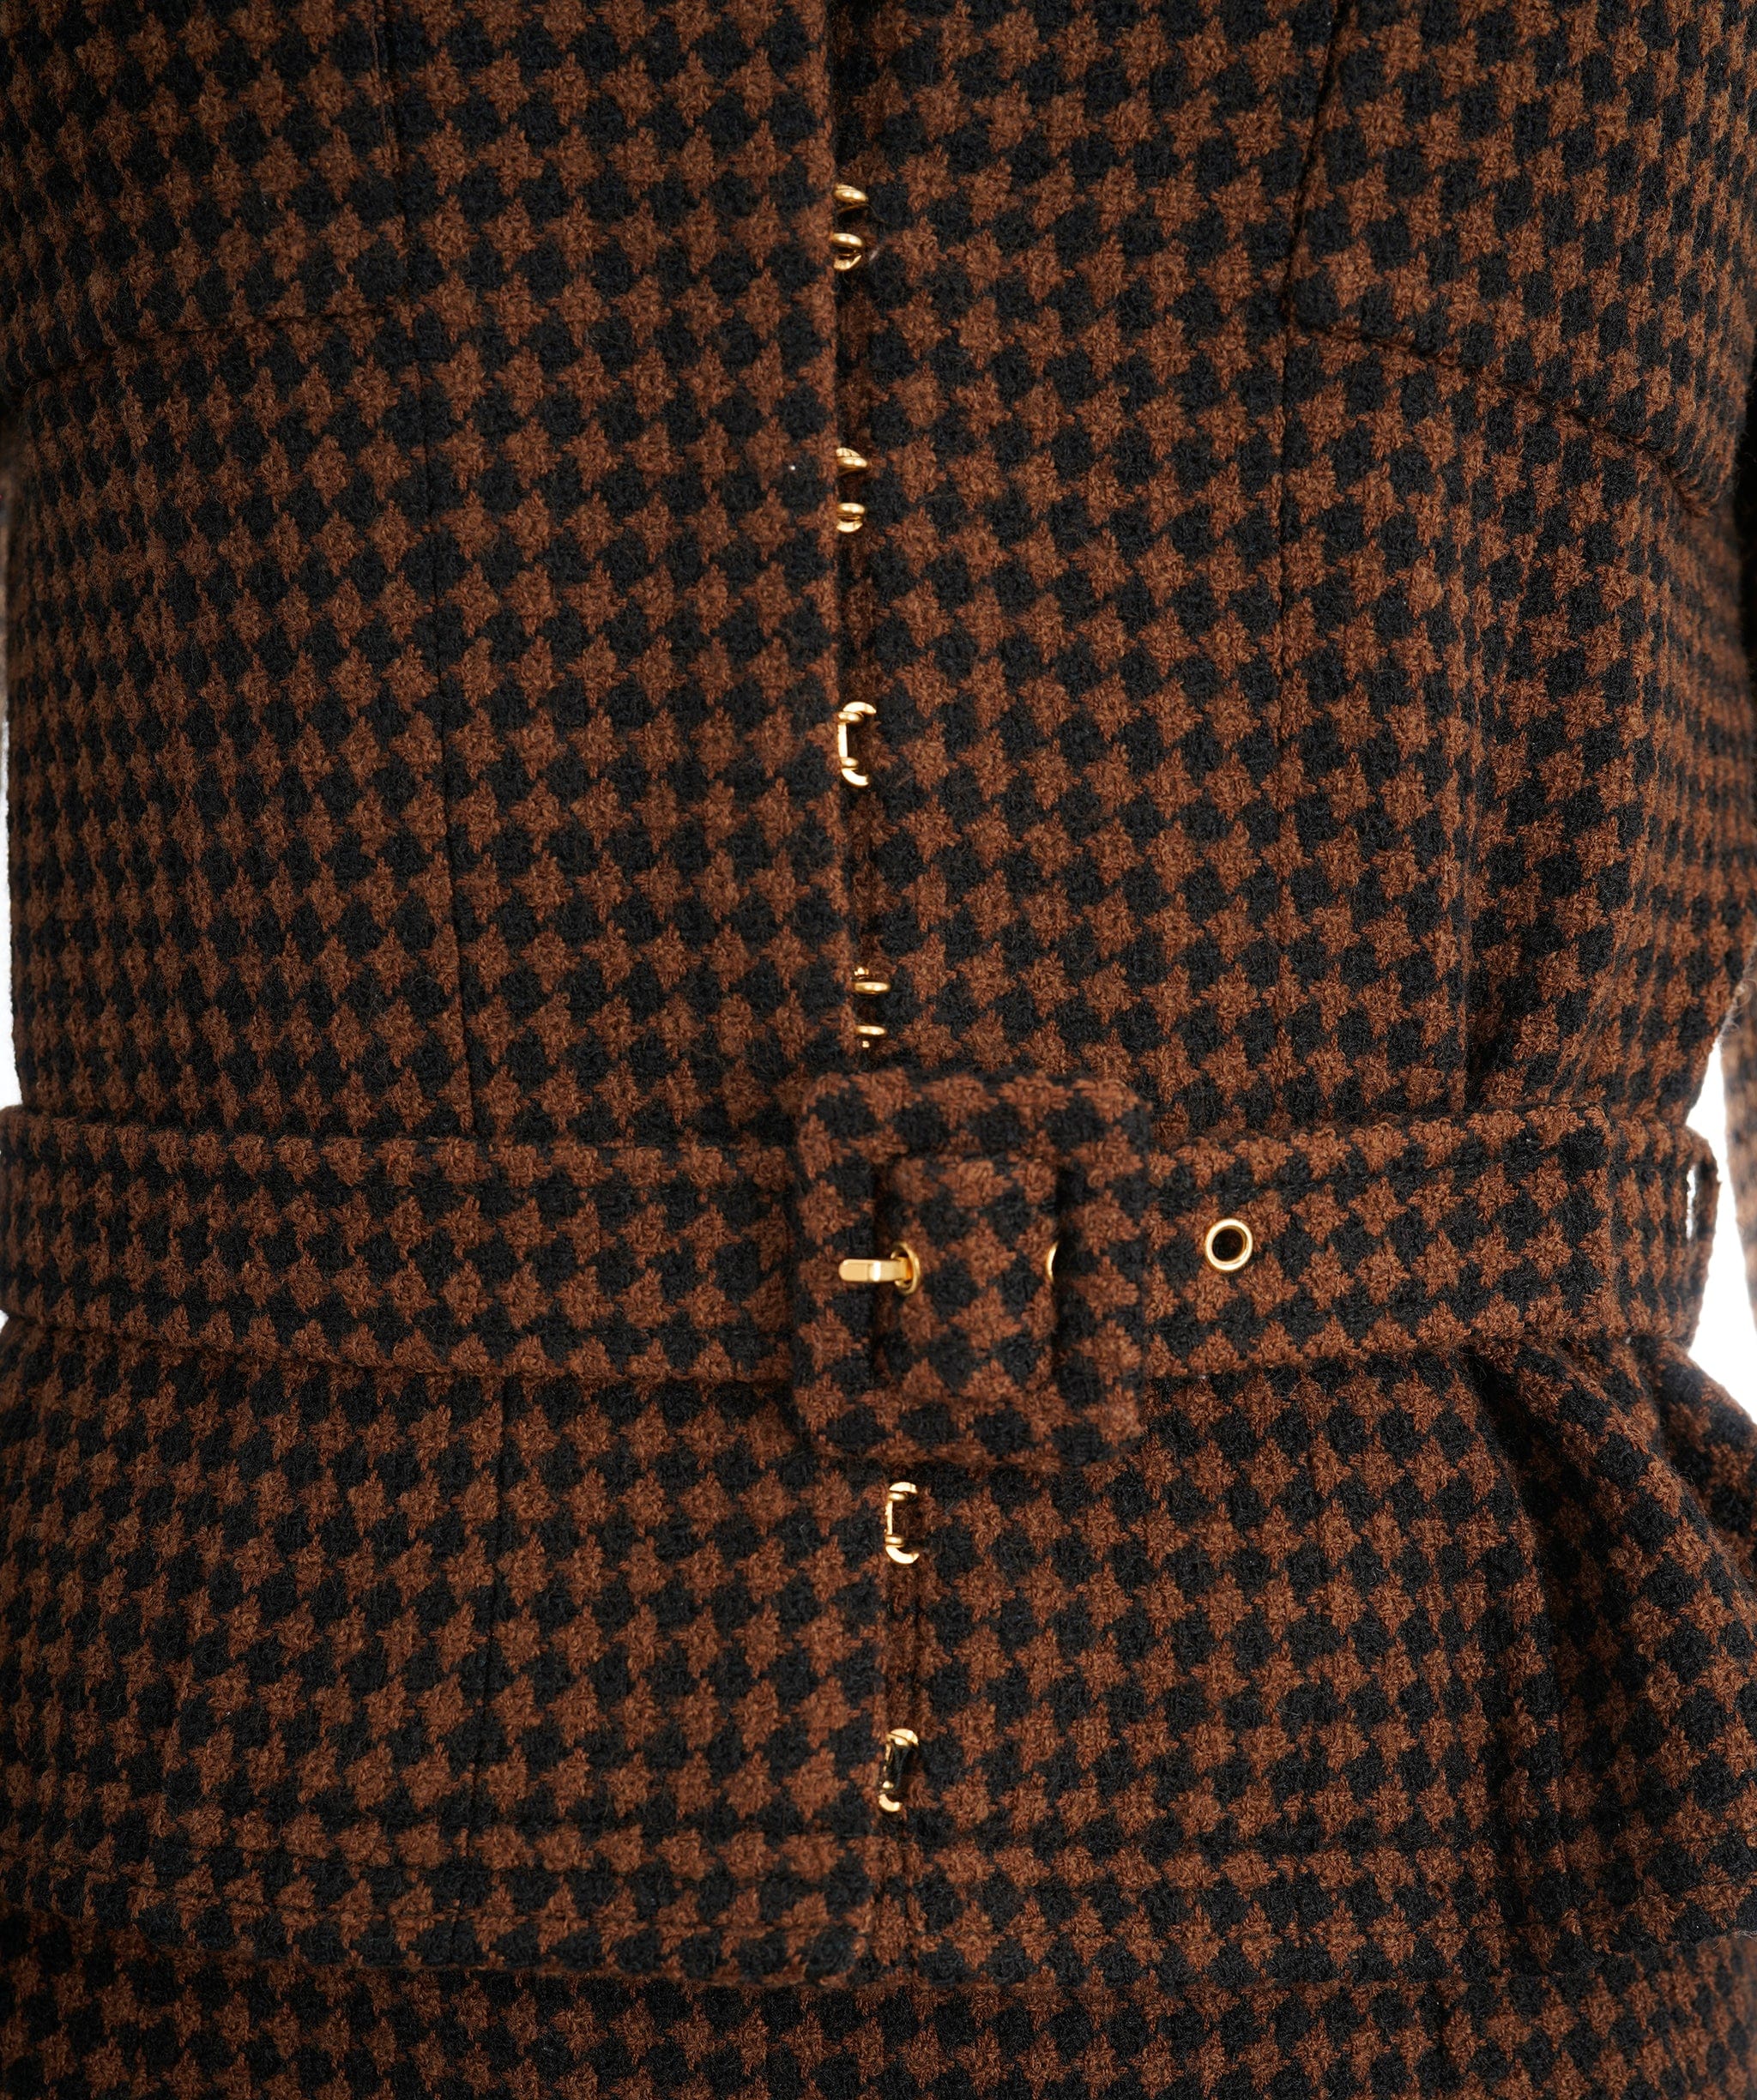 Chanel Chanel Coco Button Houndstooth Tweed Suit Jacket Skirt 96A Brown AVC1884